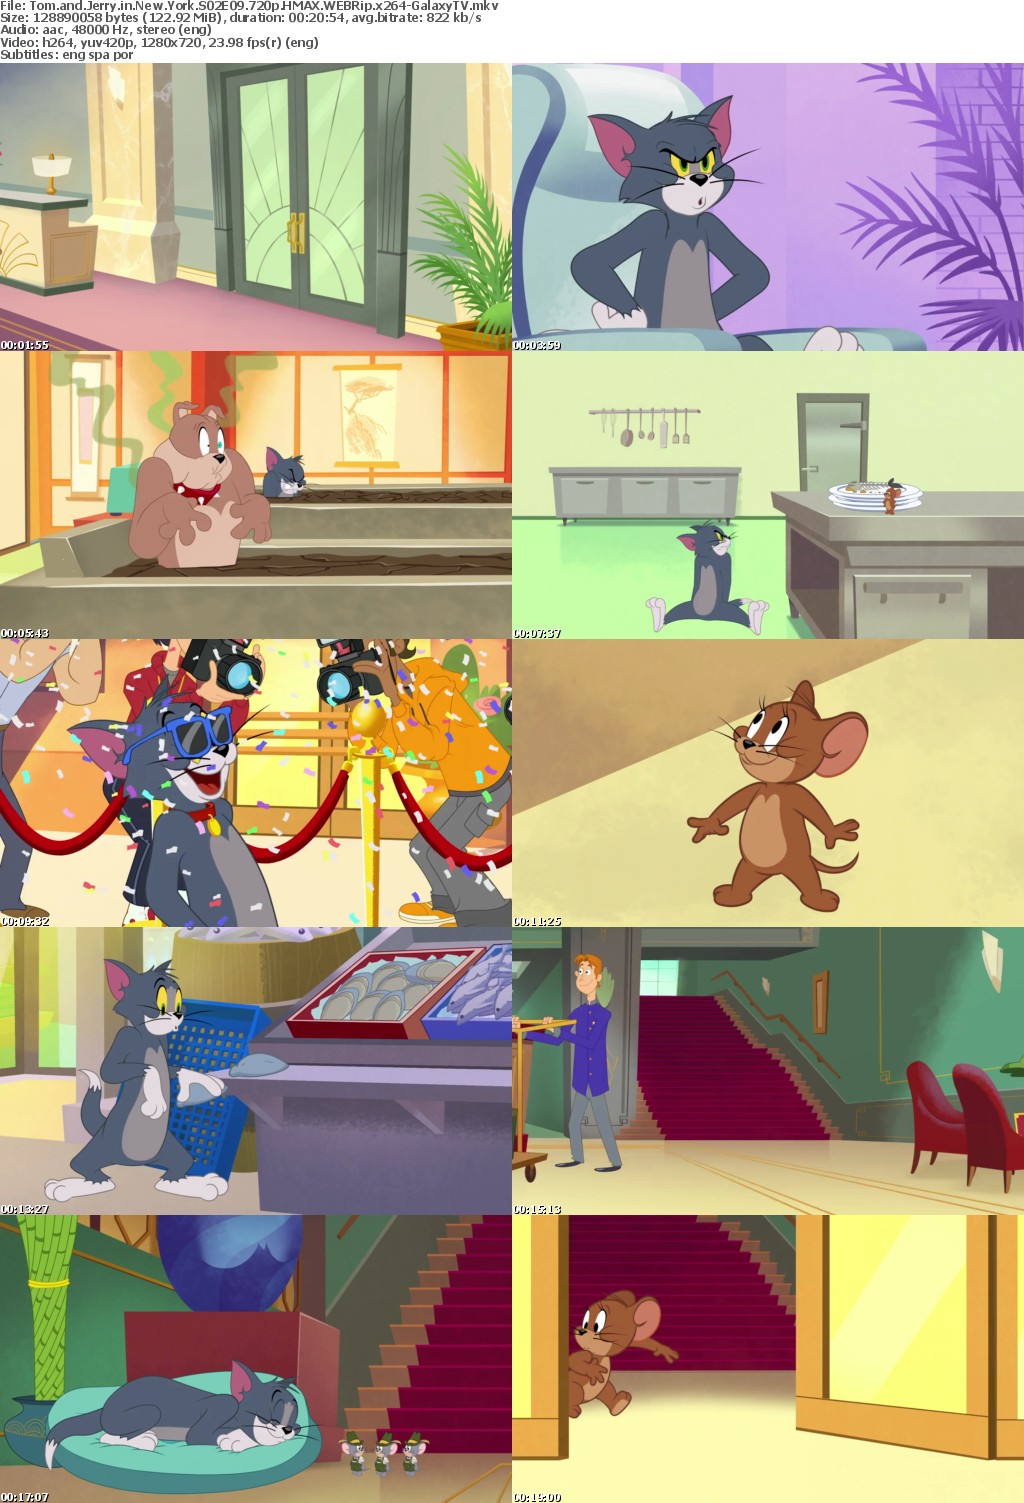 Tom and Jerry in New York S02 COMPLETE 720p HMAX WEBRip x264-GalaxyTV